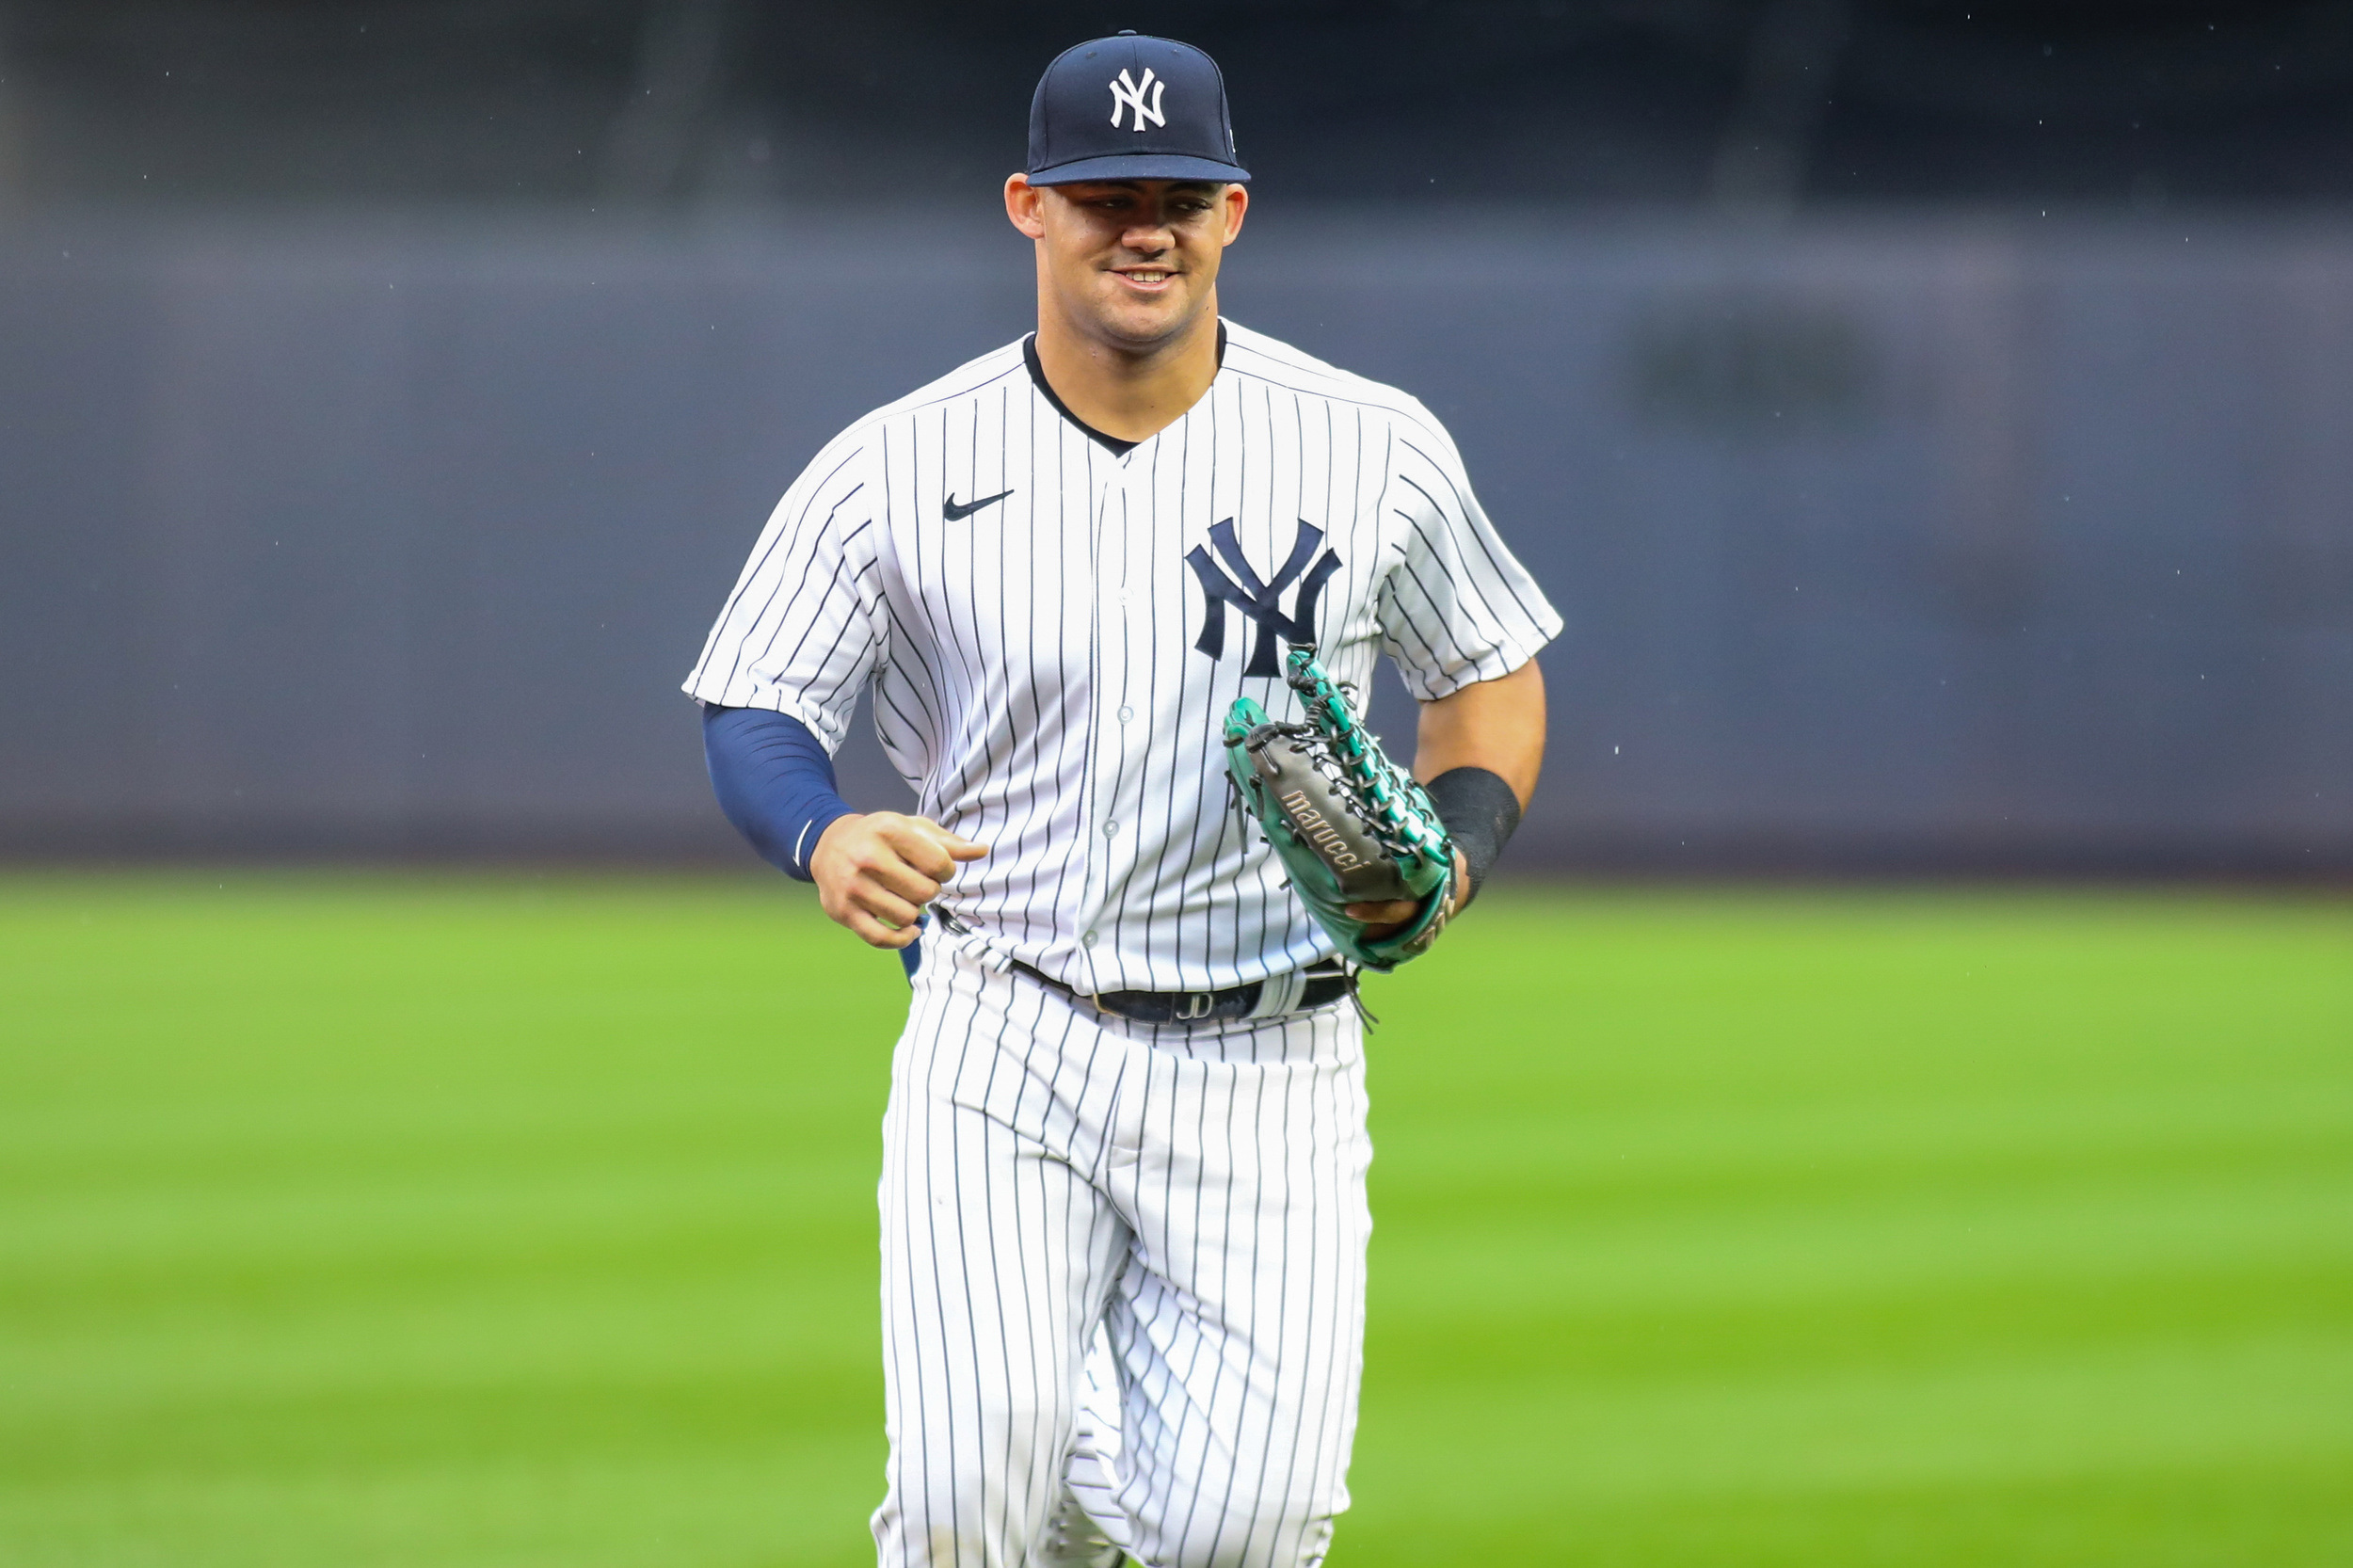 Yankees manager hypes return of top prospect: 'He's going to be a star'